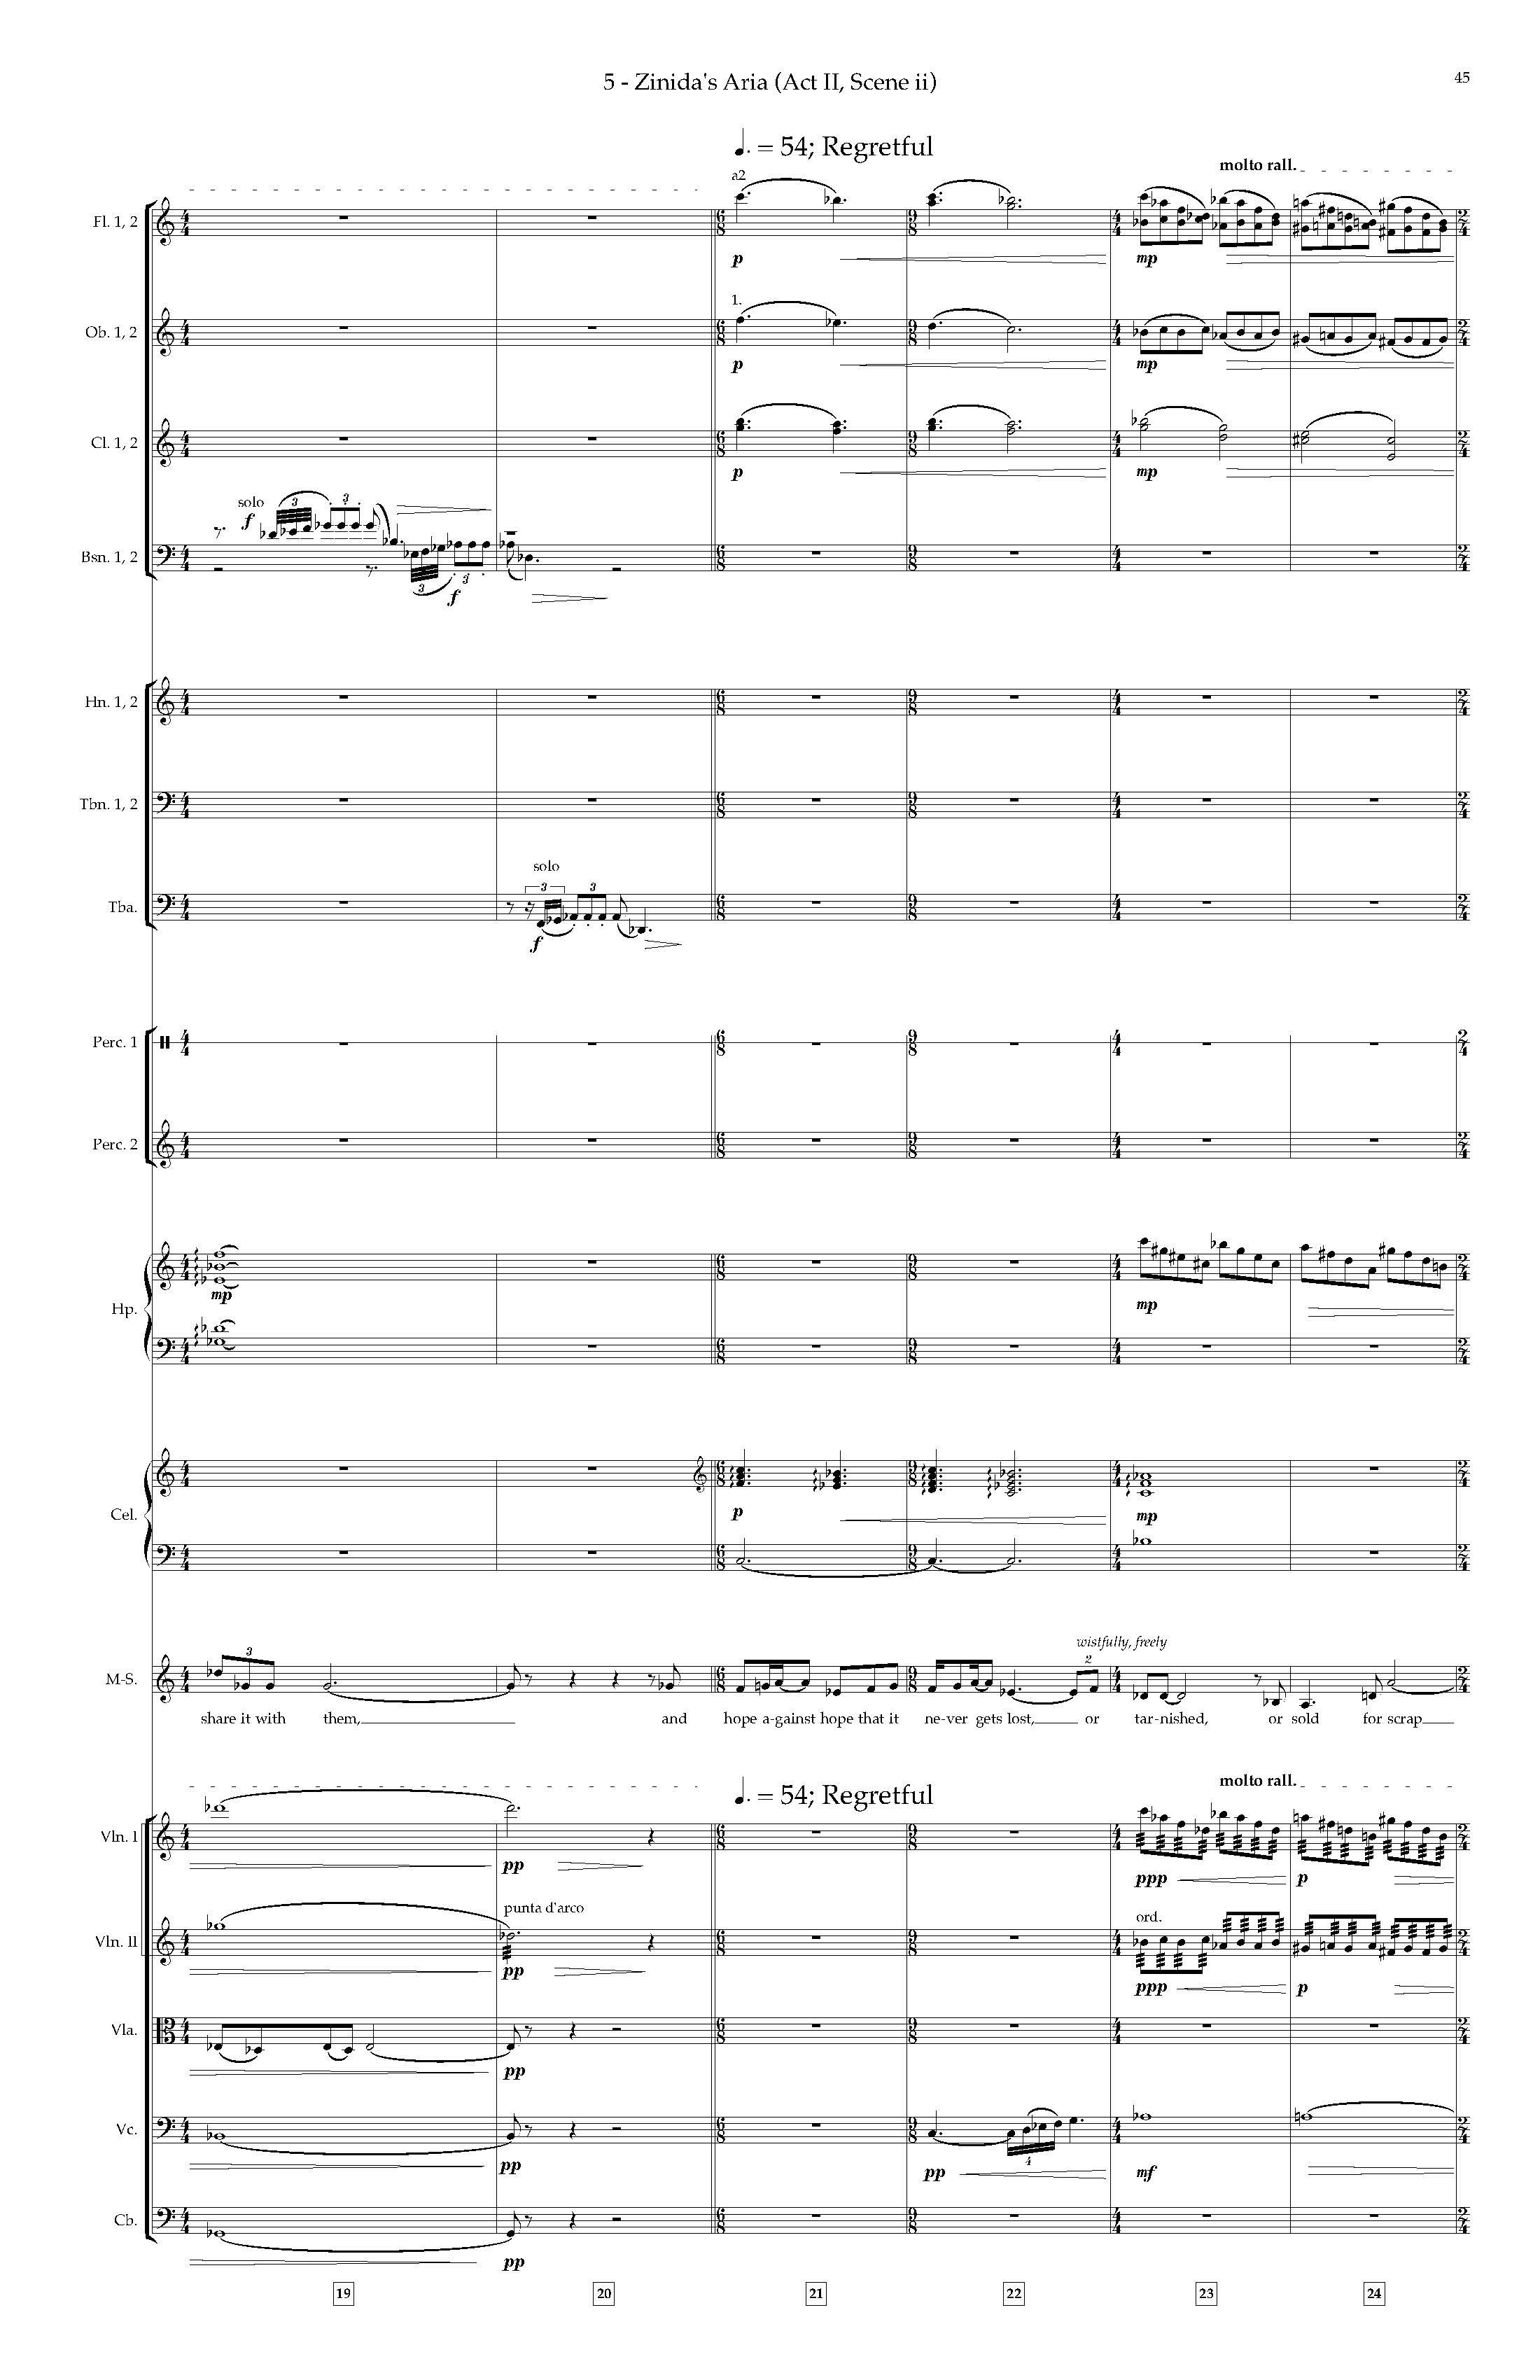 Arias and Interludes from HWGS - Complete Score_Page_51.jpg